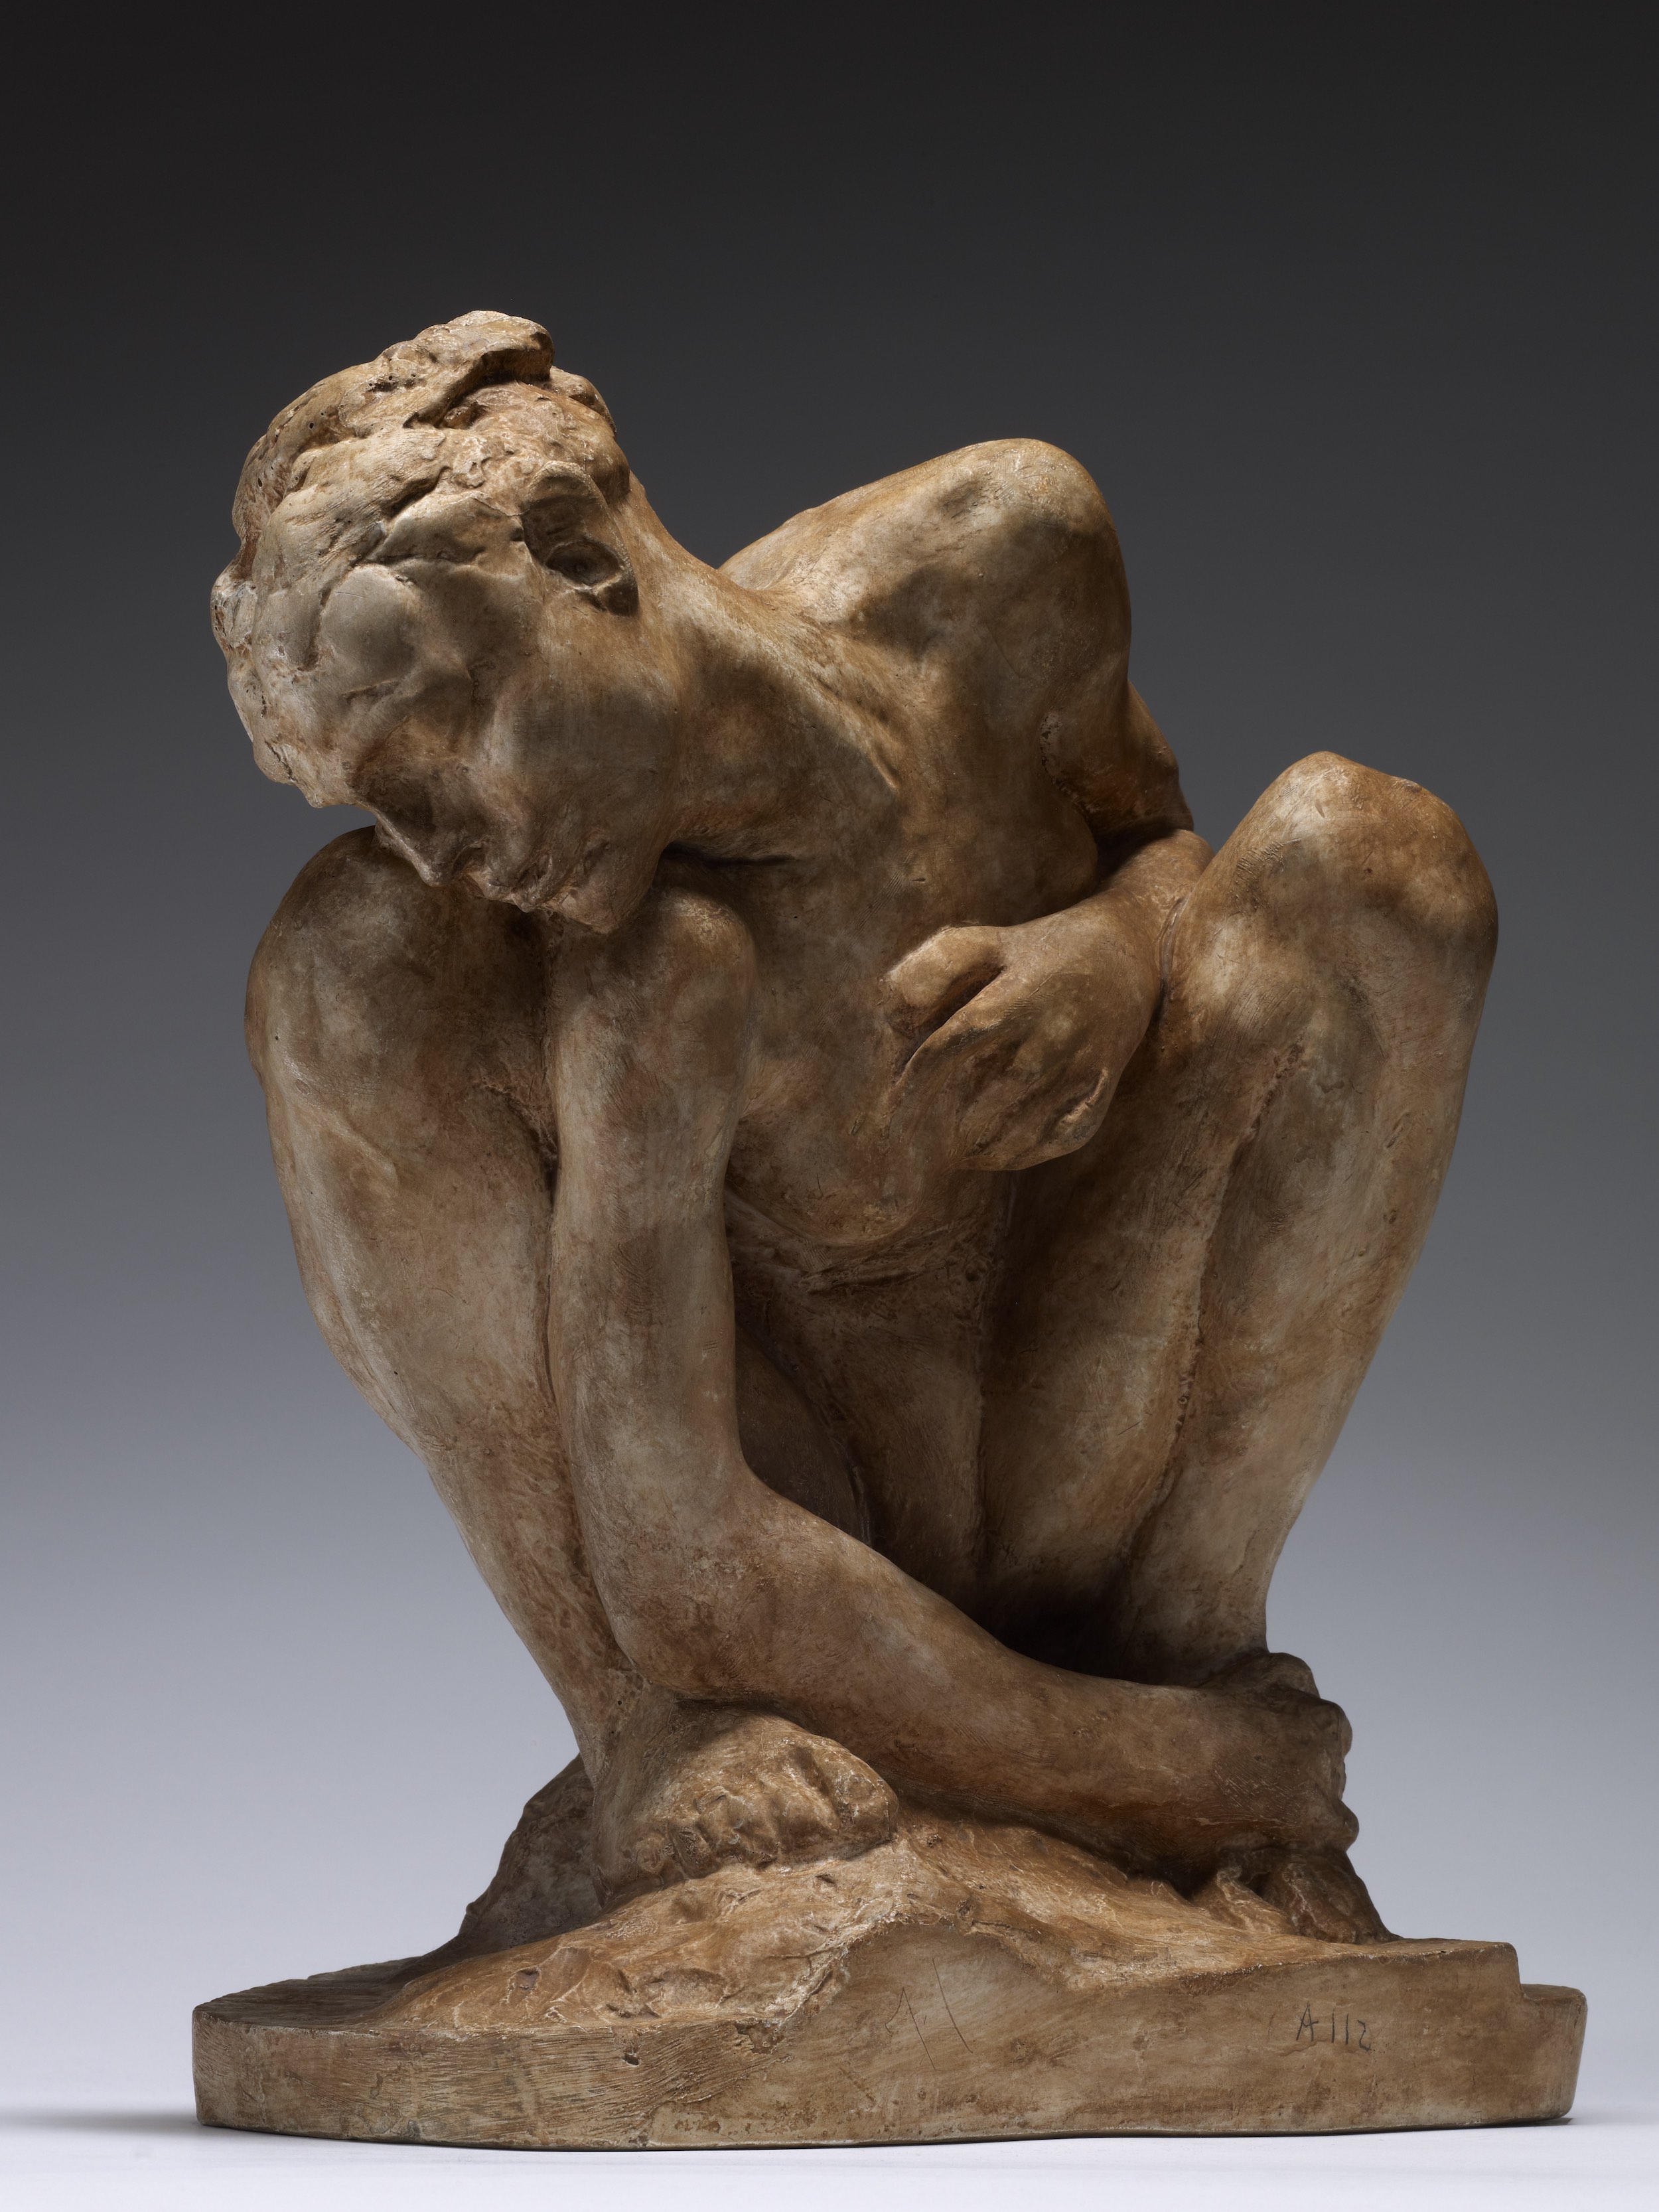 Femme accroupie by Auguste Rodin - 1882 